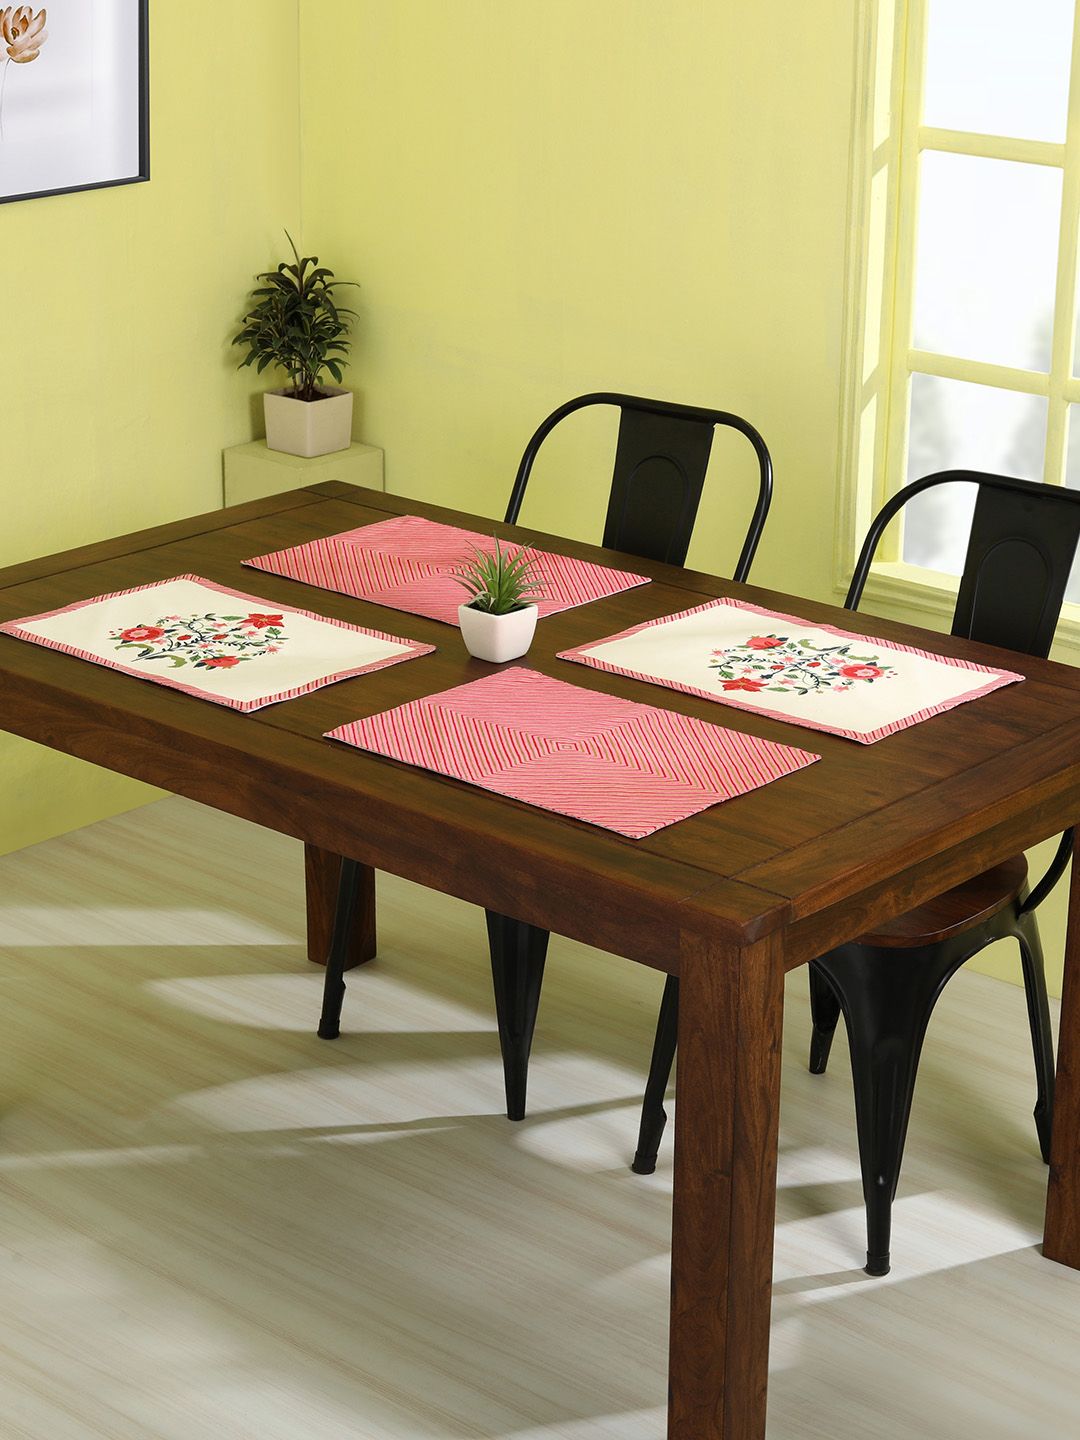 Chumbak Set of 4 Pink & White Hearty Harvest Table Mats Price in India